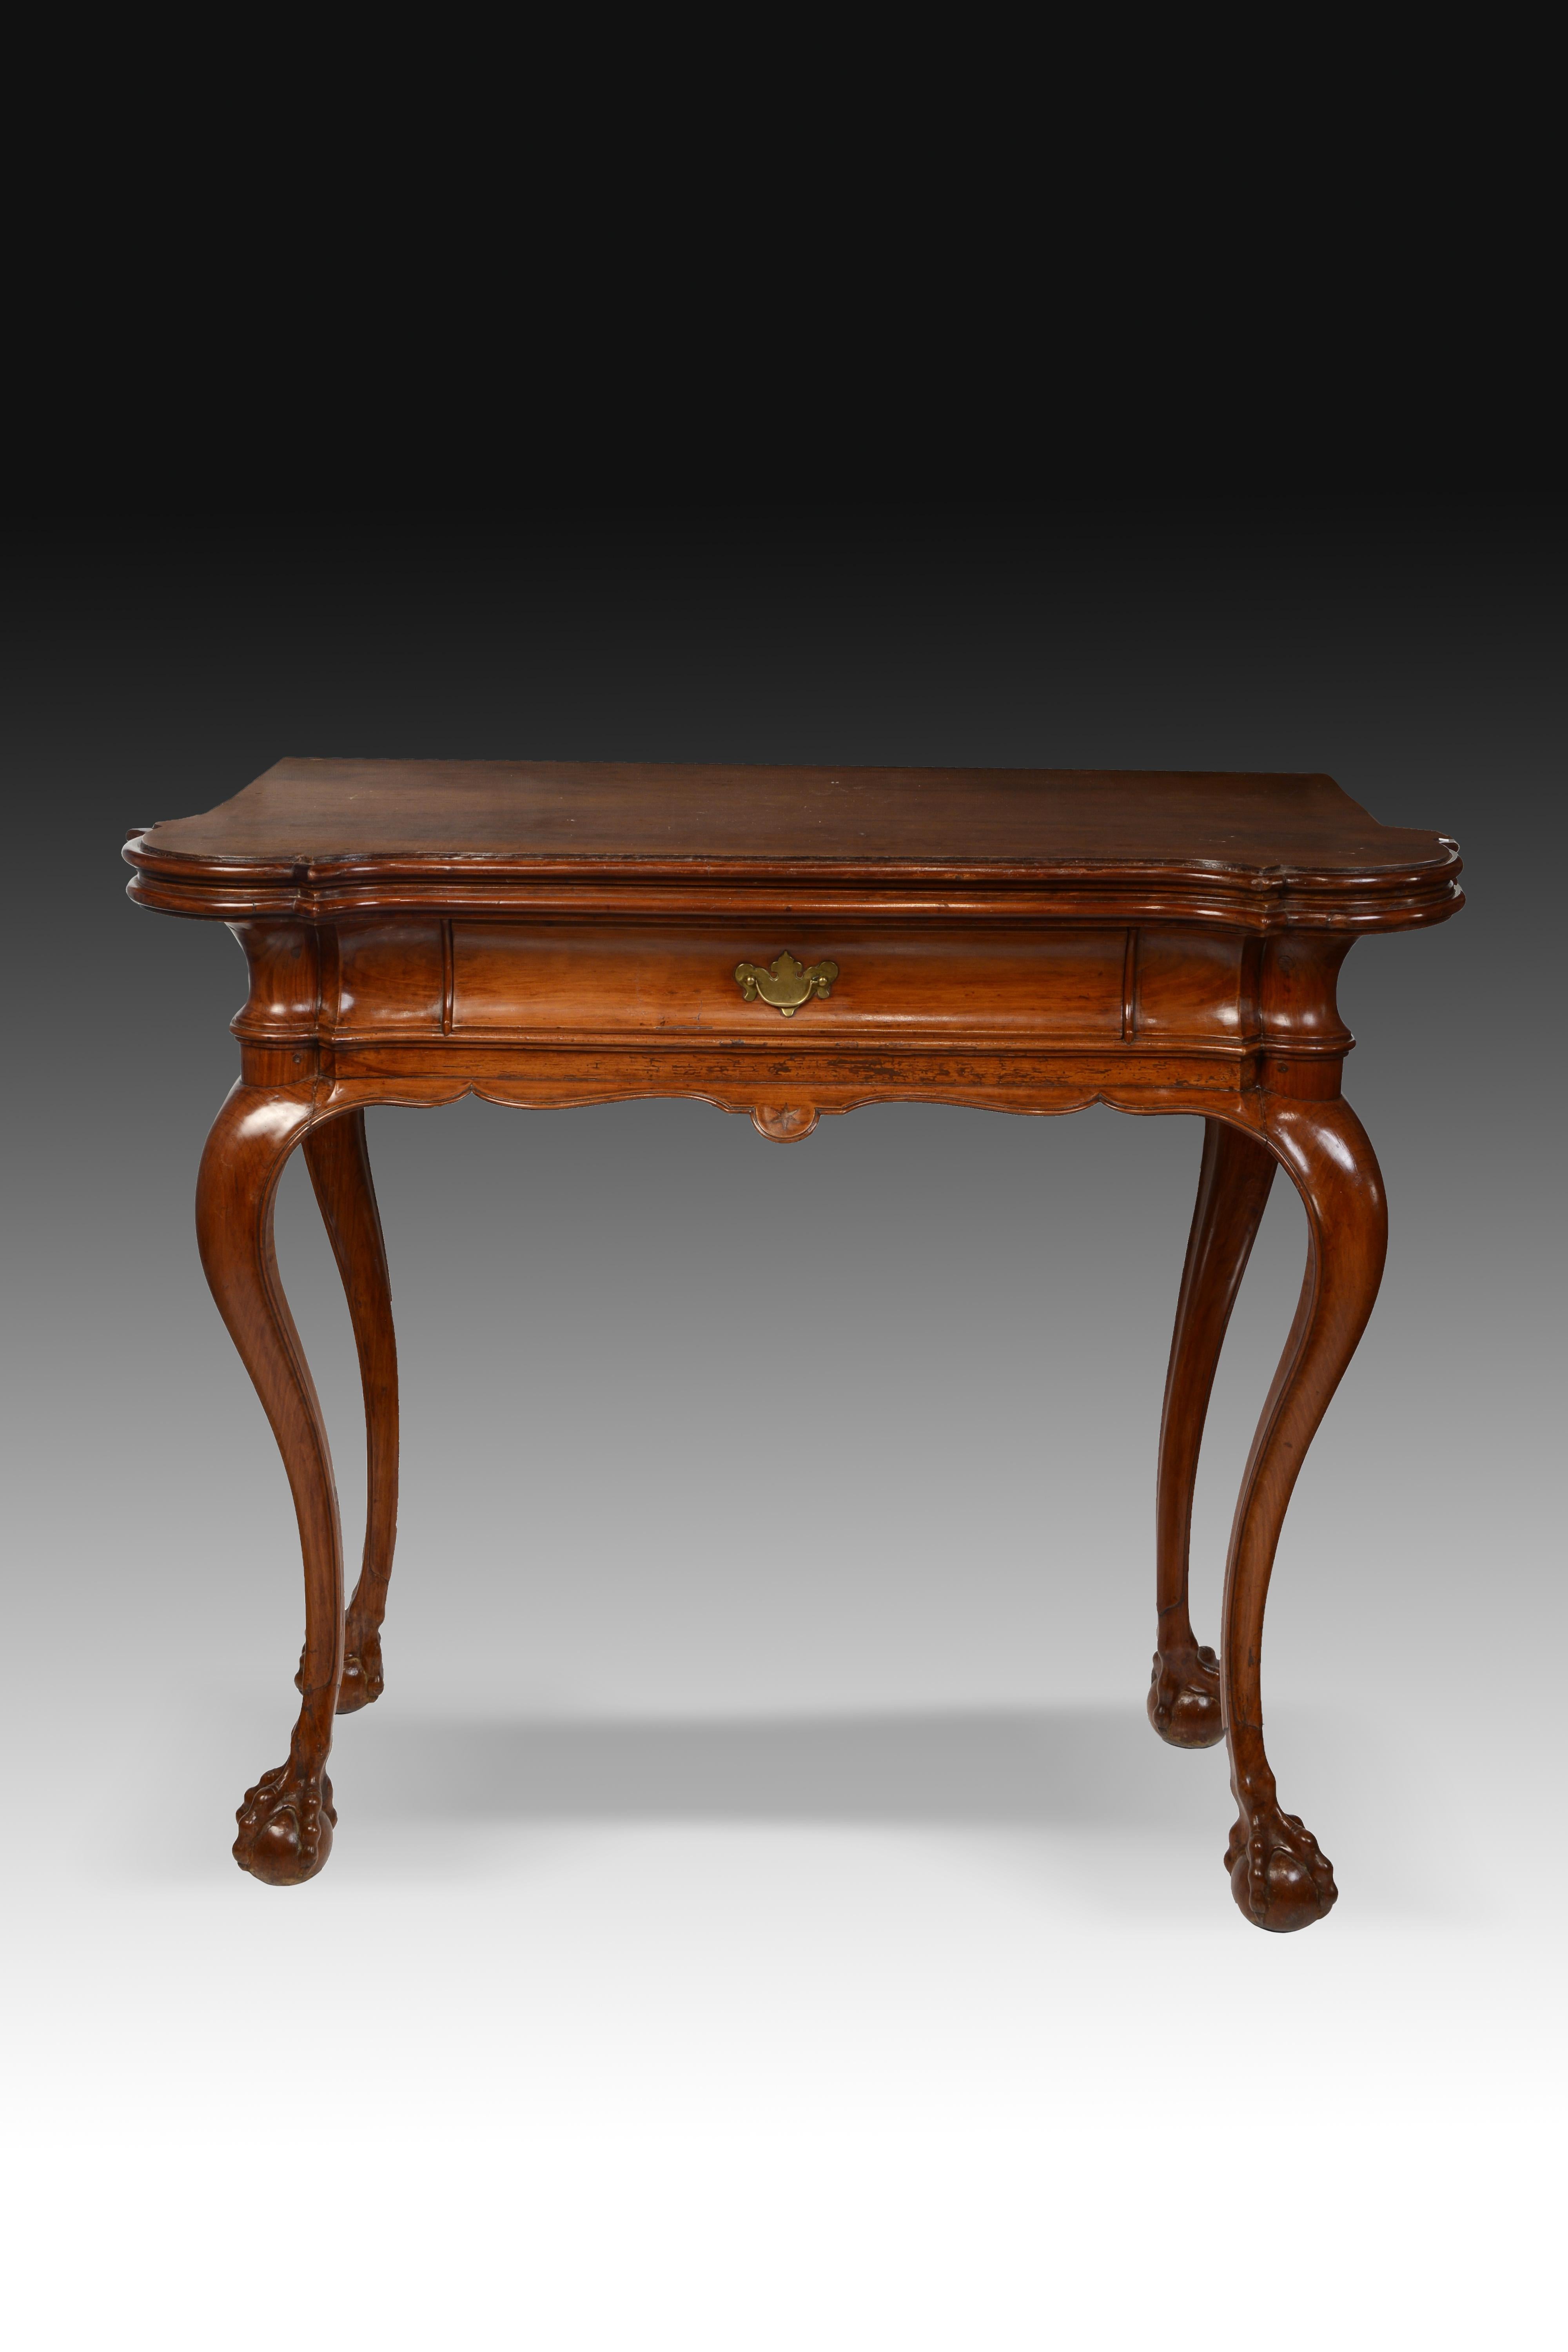 Other Portuguese Games Table, Mahogany, 18th Century